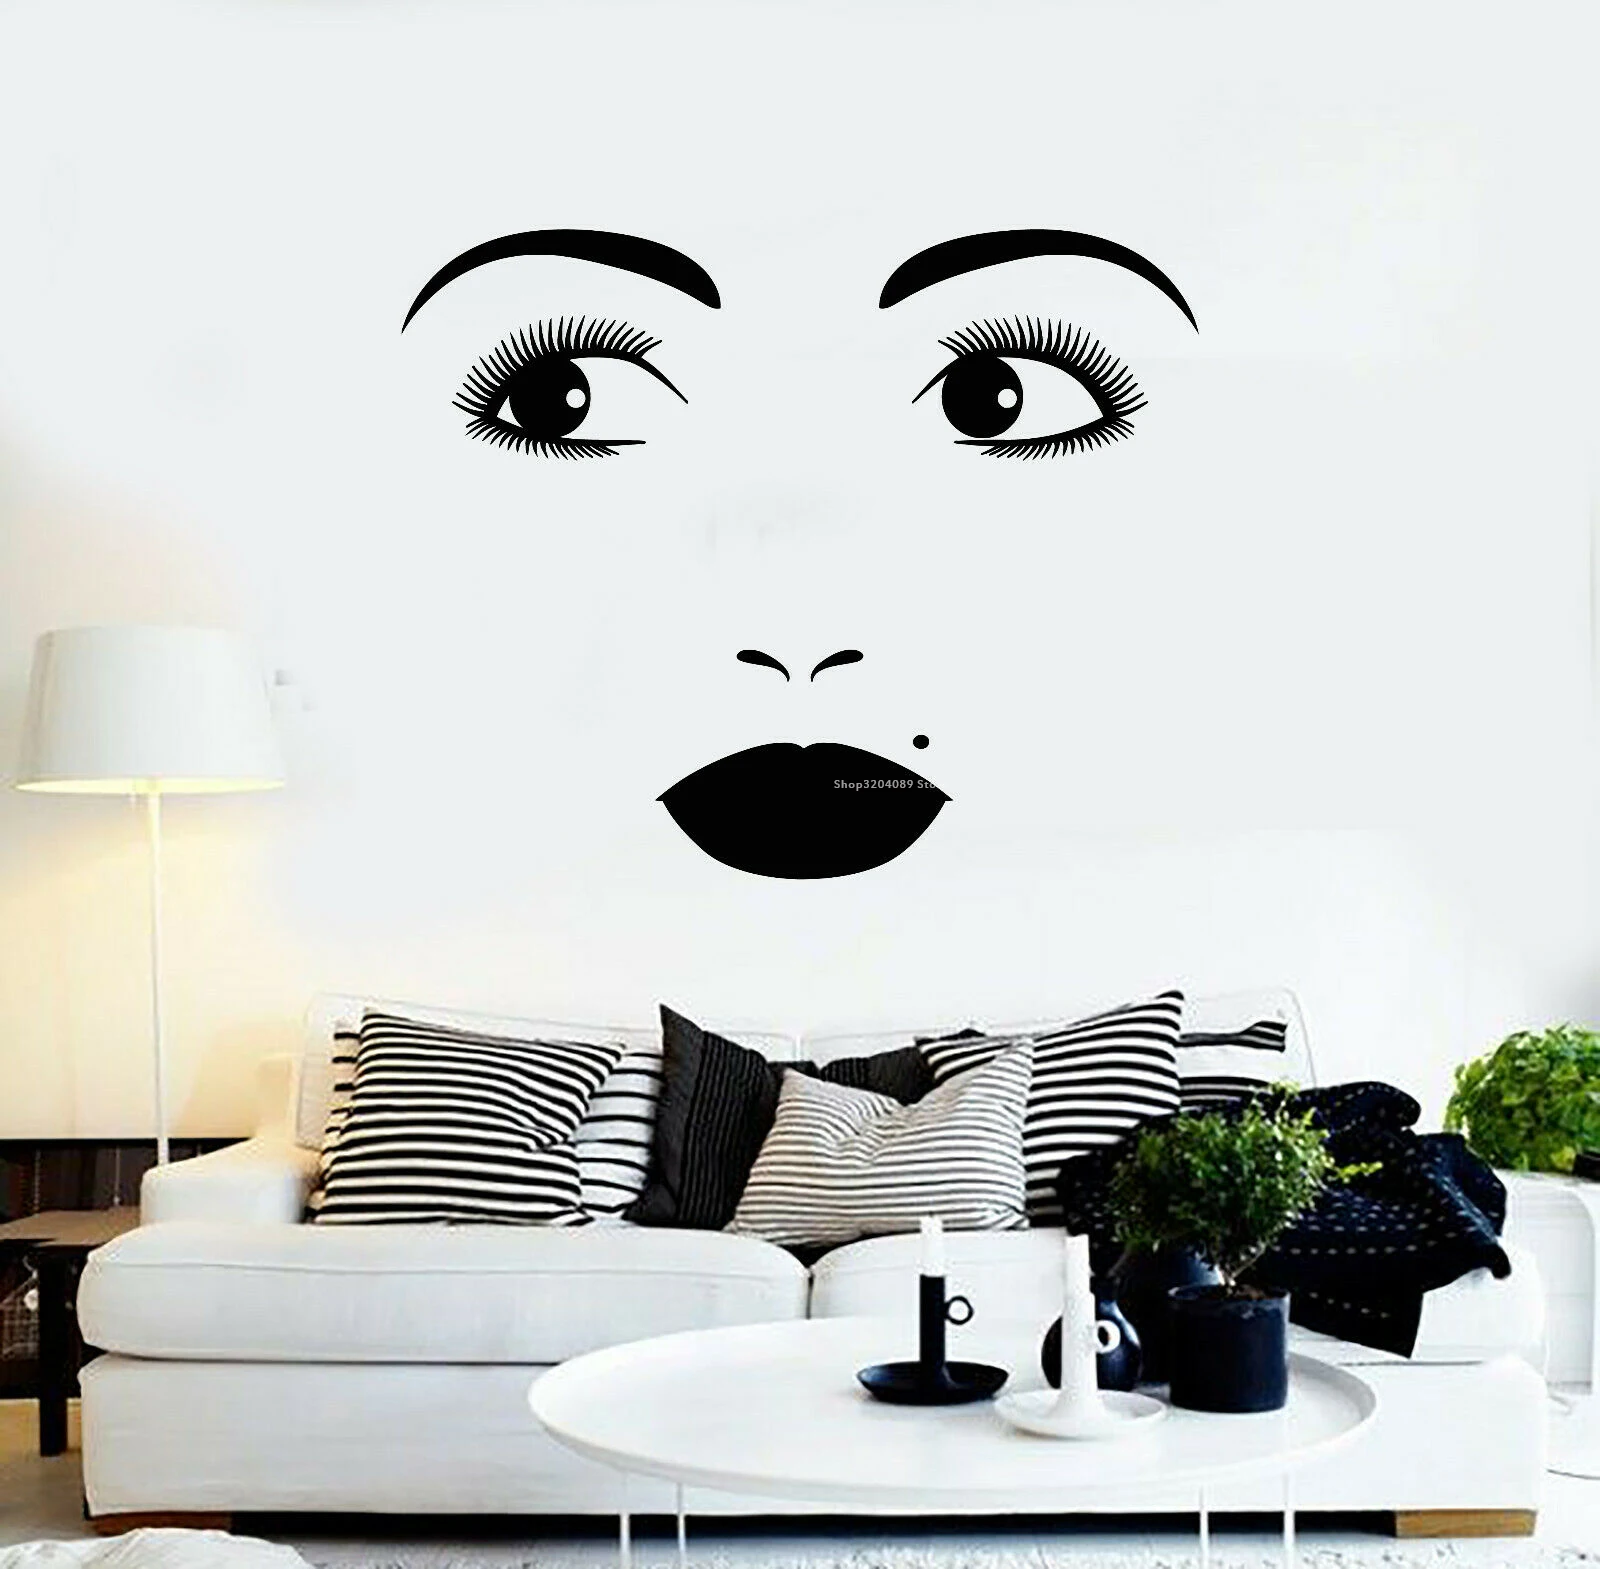 LARGE PERSONALISED WOMAN SALON LIPS BEDROOM WALL MURAL GIANT ART STICKER DECAL